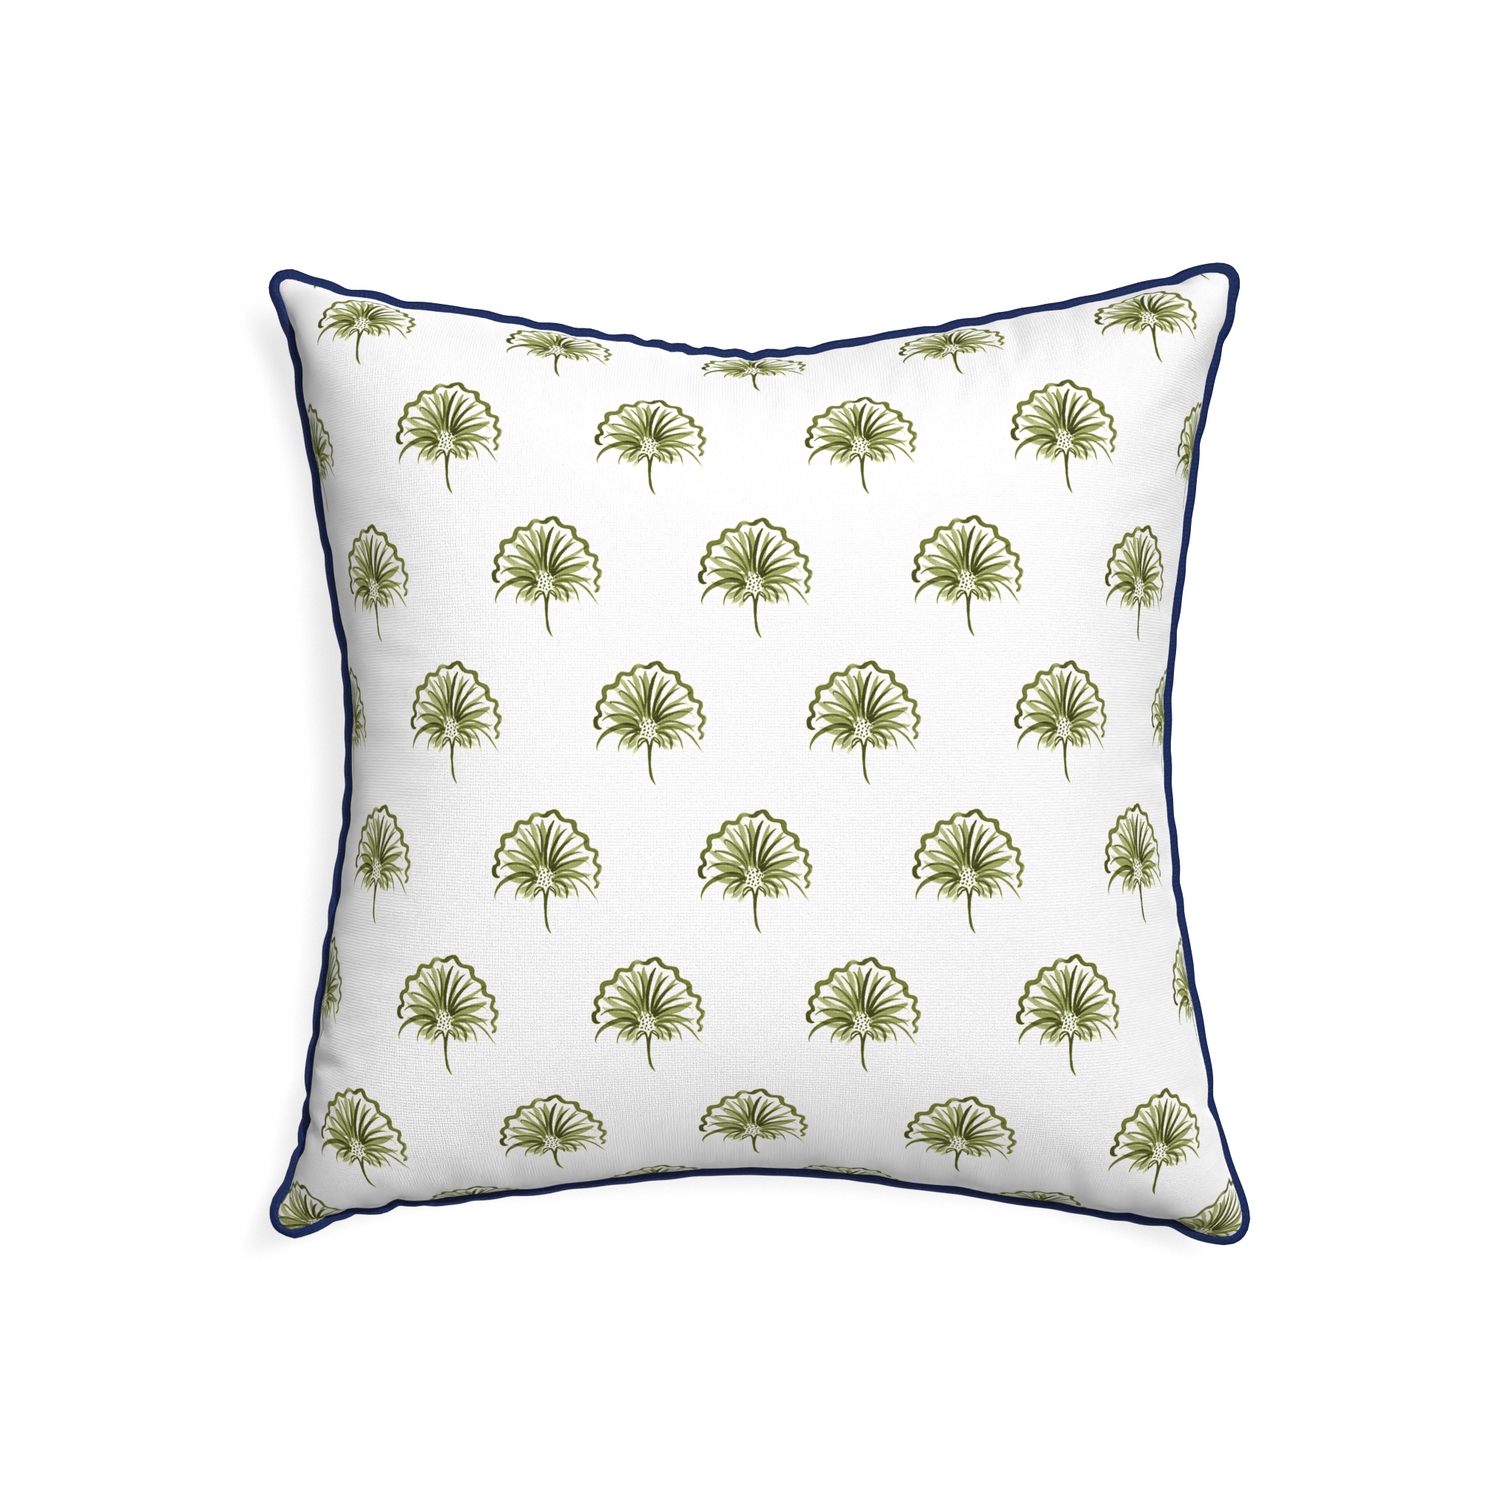 22-square penelope moss custom green floralpillow with midnight piping on white background